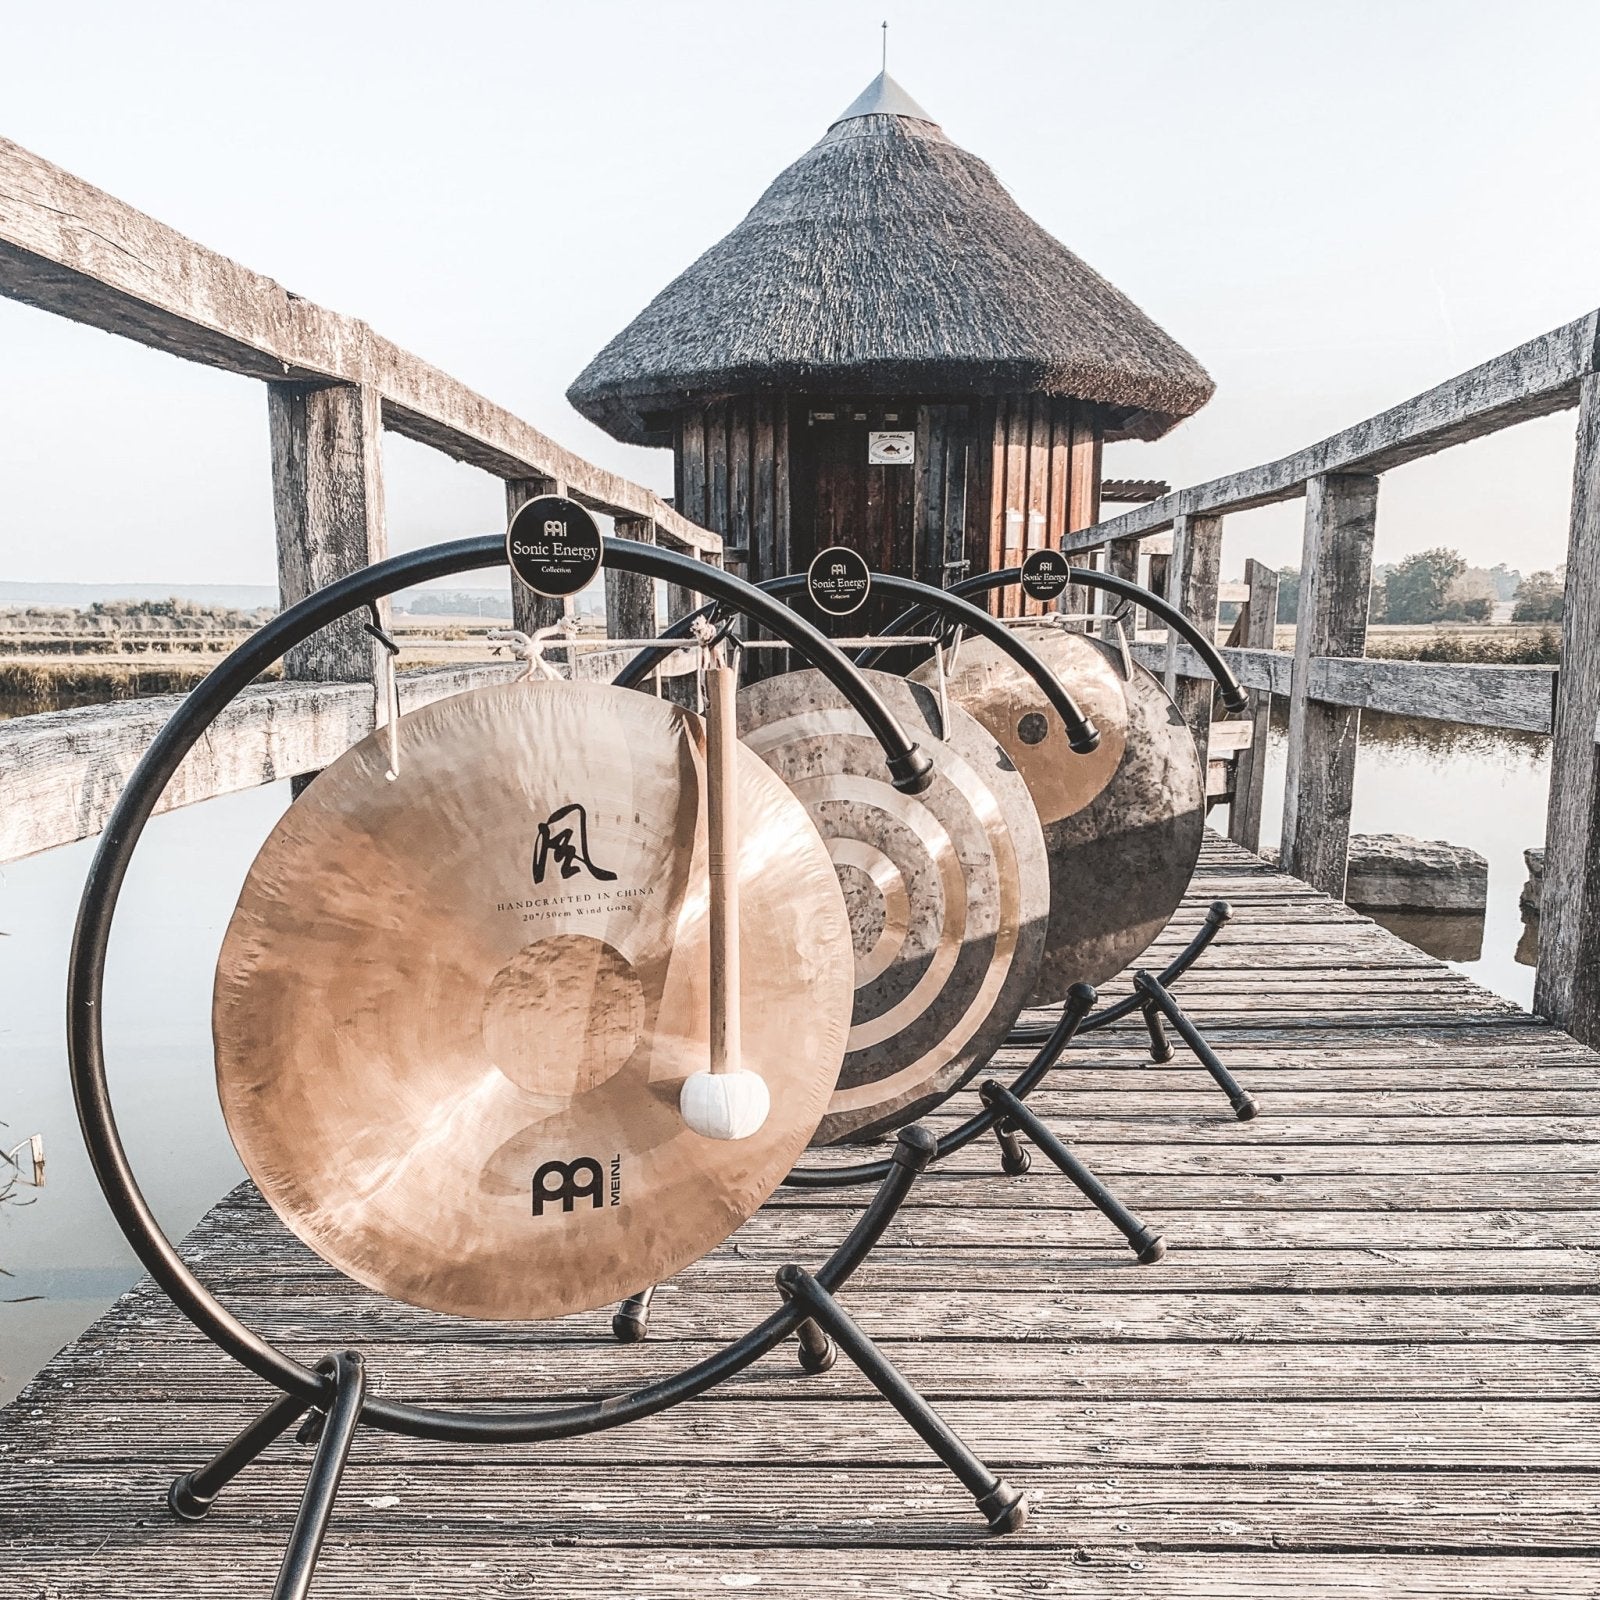 Round Gong / Tam Tam Stand - Table or Floor - Table Gong/ Tam Tam Stand